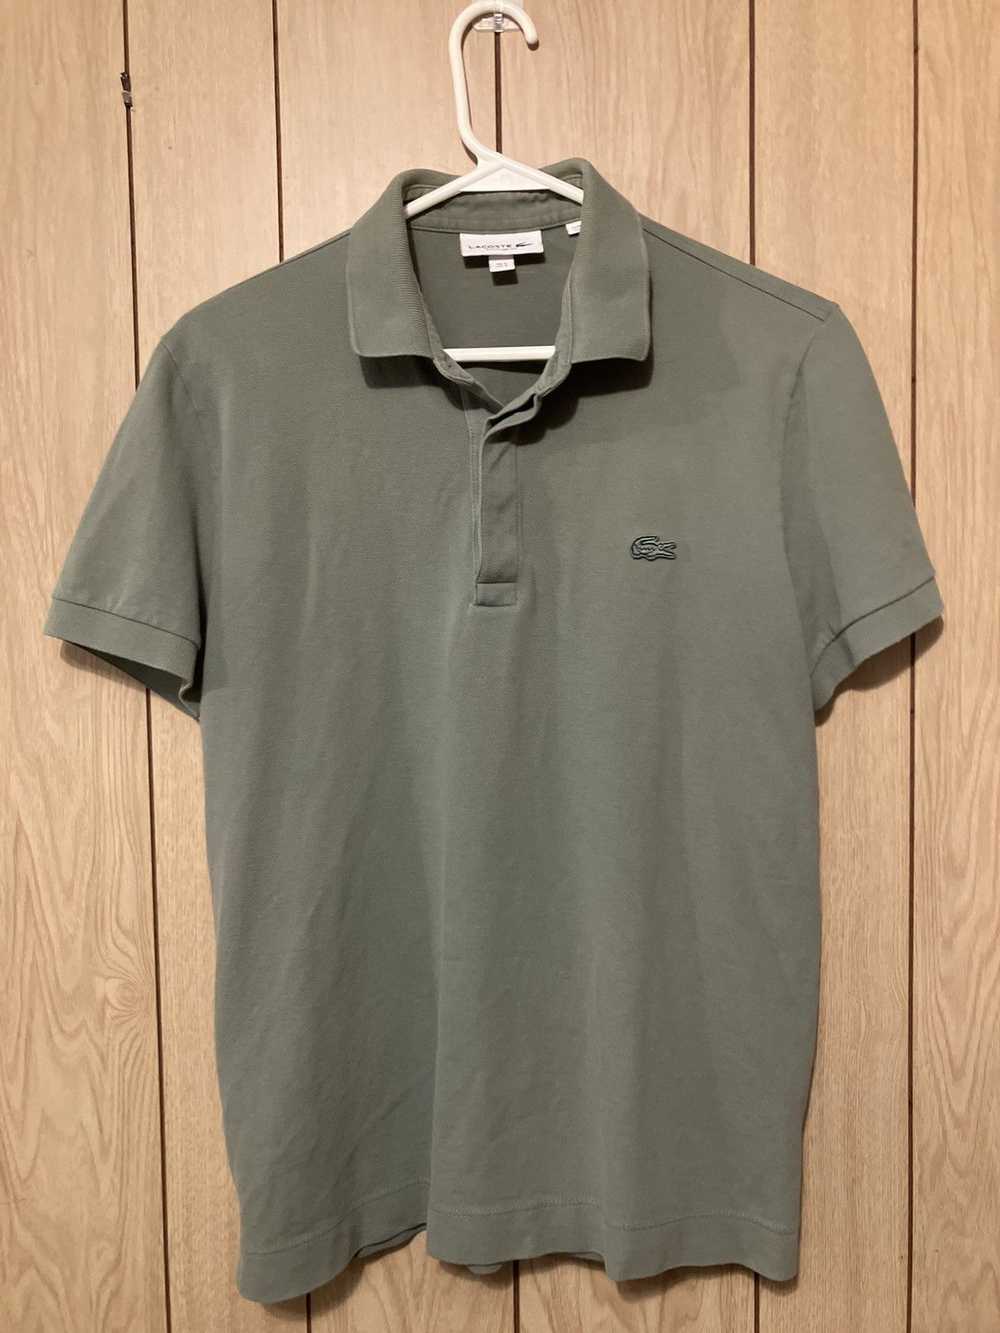 Lacoste Lacoste Polo Shirt. Small - image 6